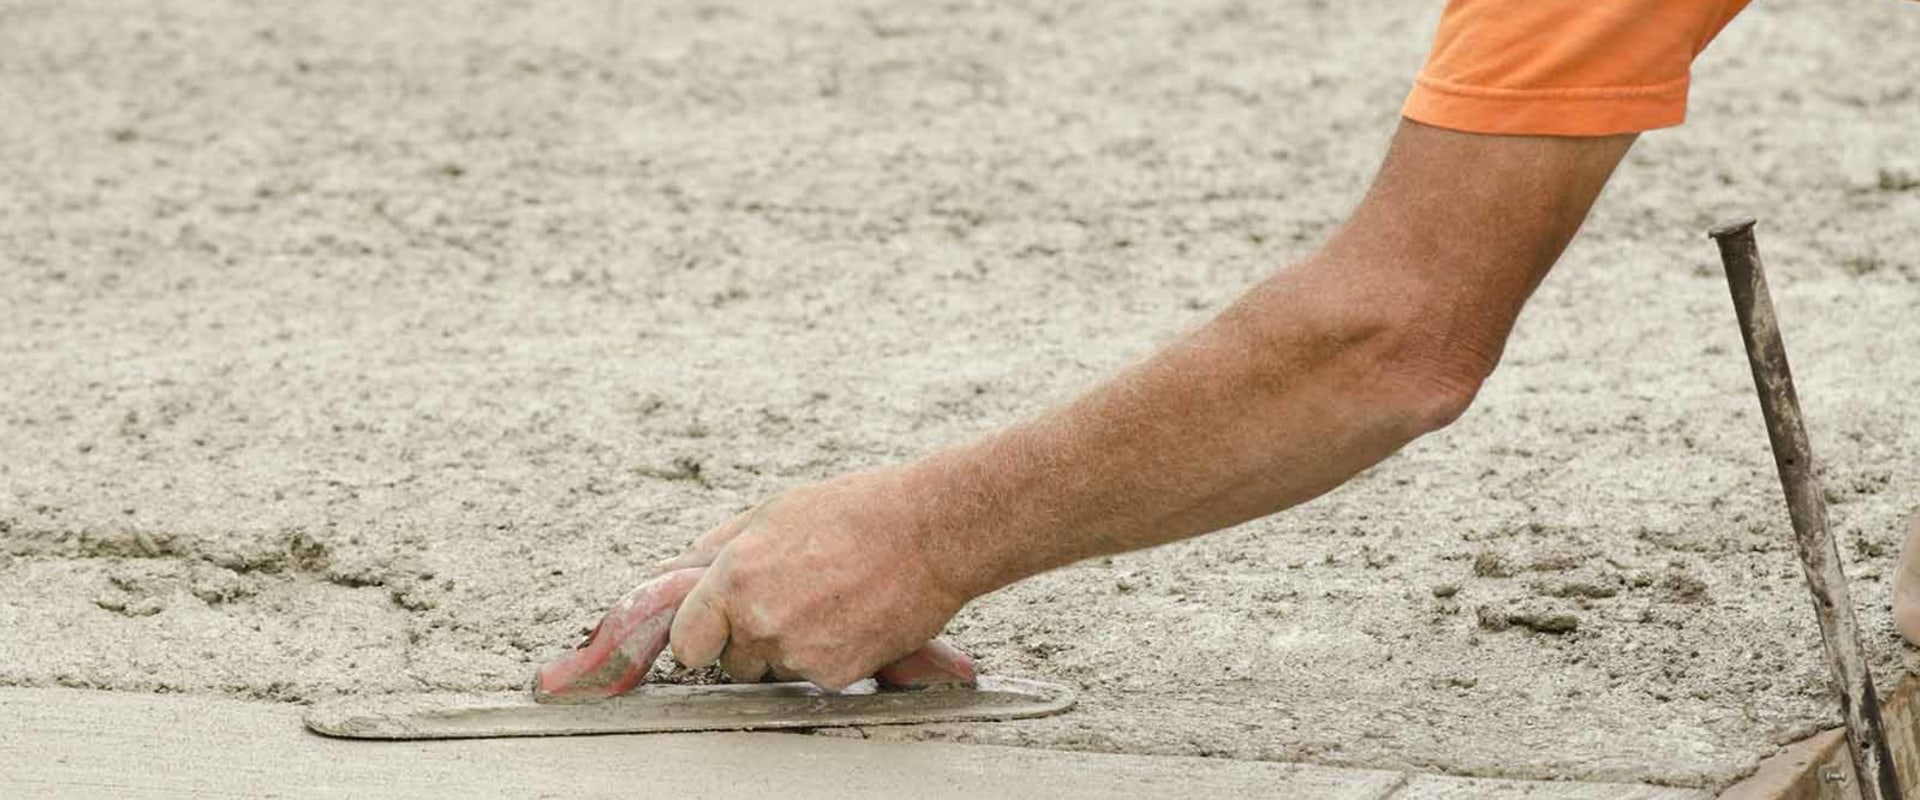 Pouring New Concrete Over Old: A Step-by-Step Guide